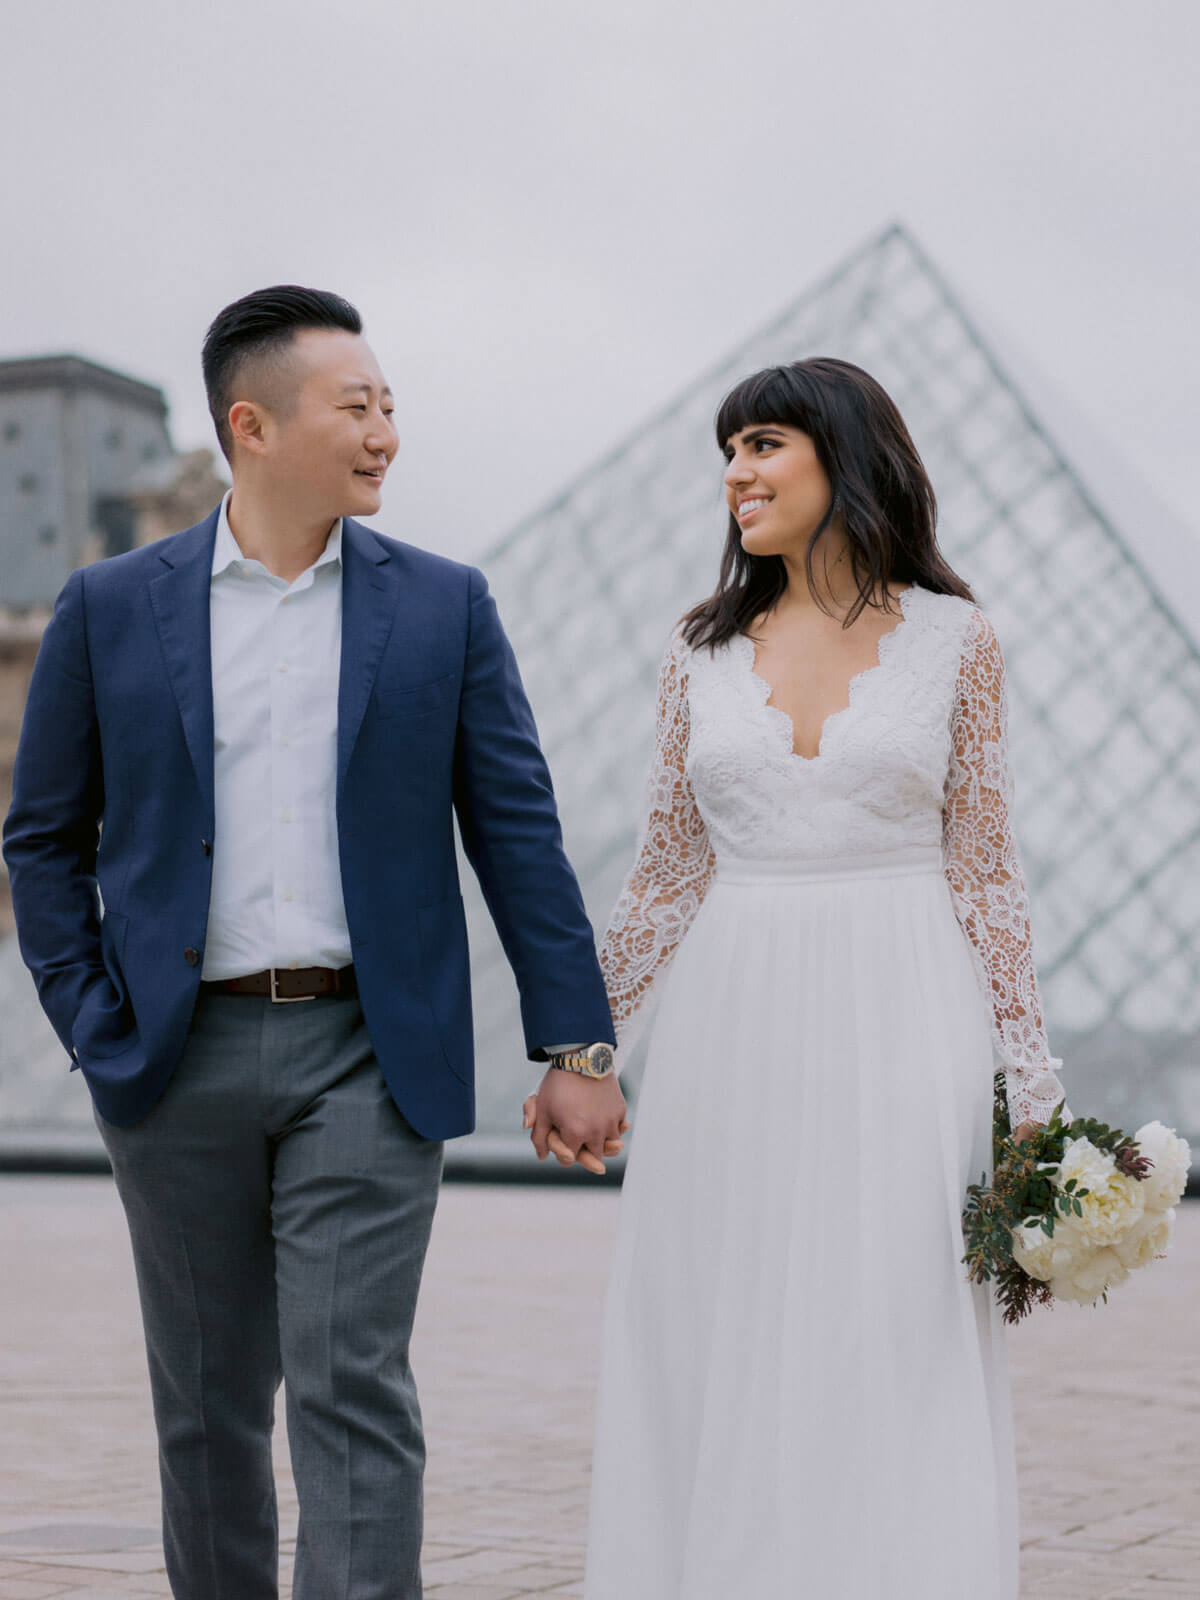 The bride and groom are happily looking at each other in Paris, France. Destination wedding image by Jenny Fu Studio